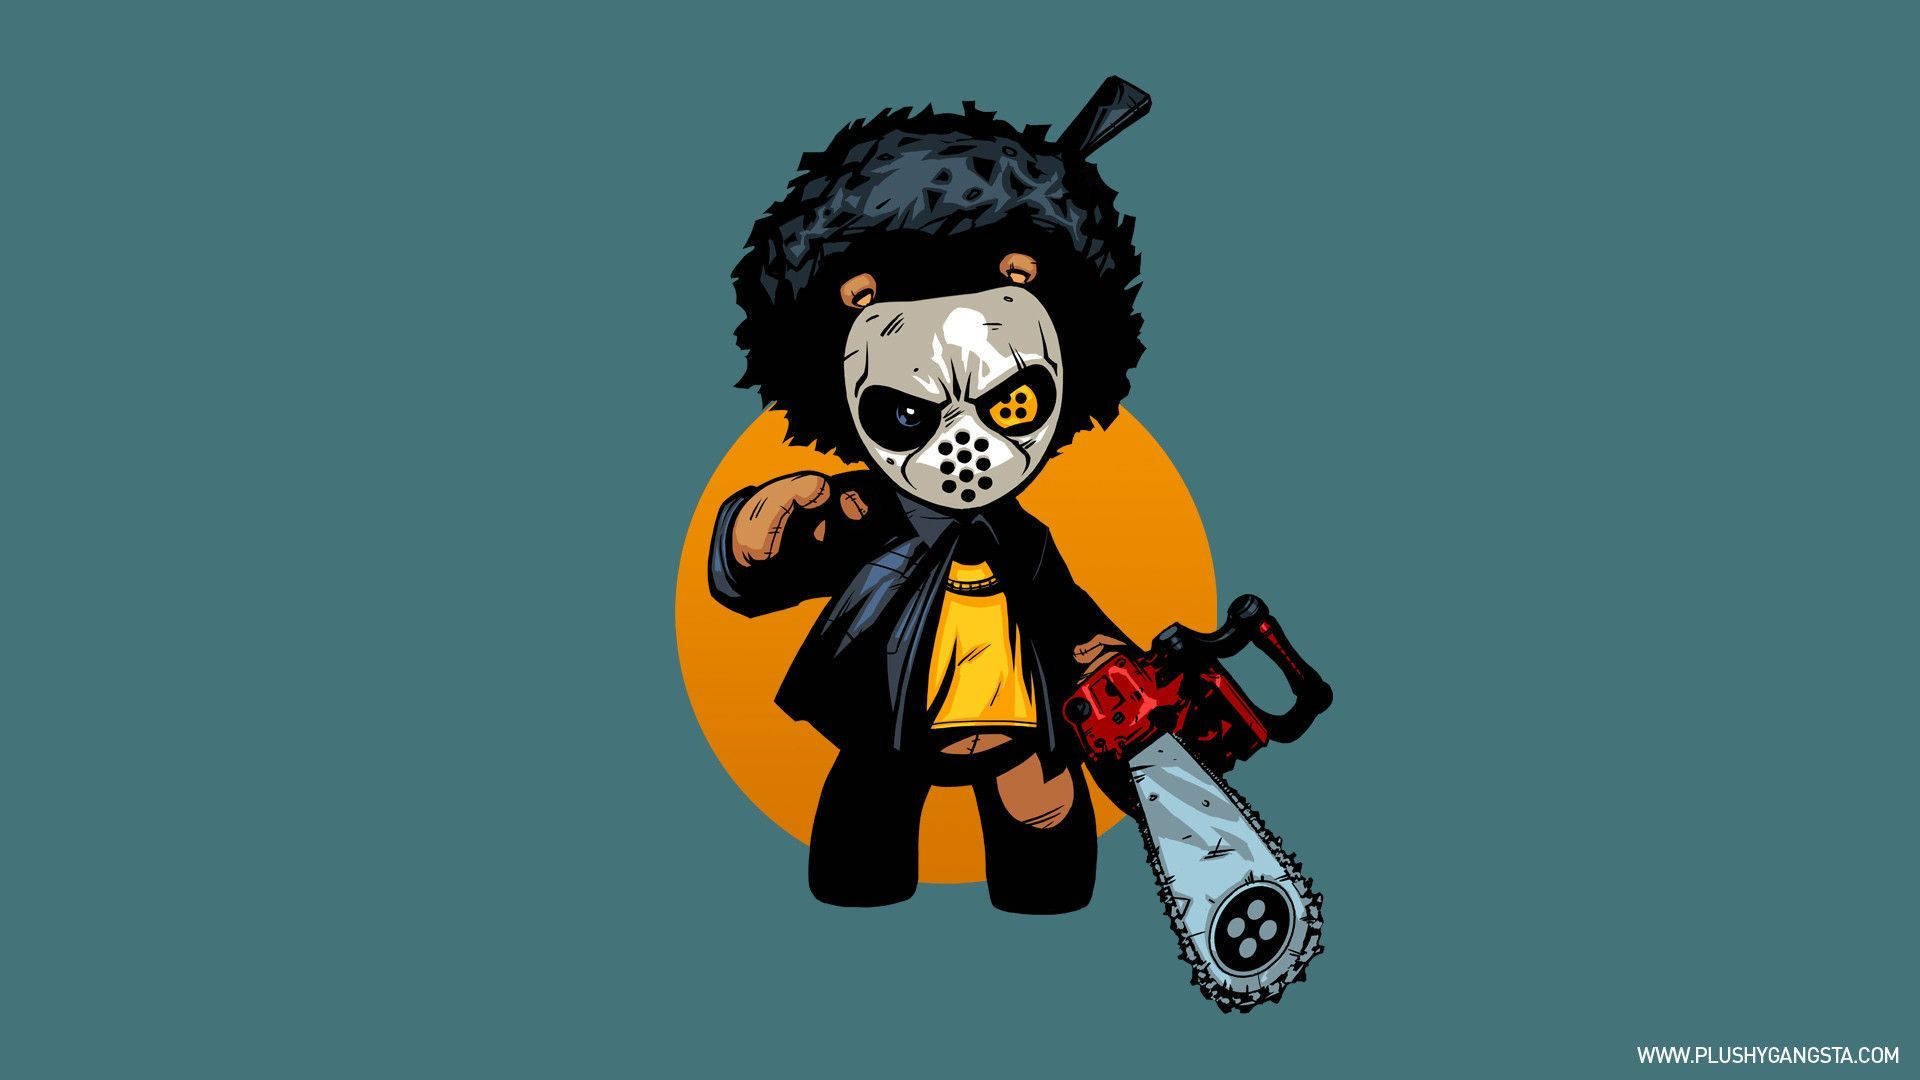 A powerful gangsta cartoon character ready for action Wallpaper